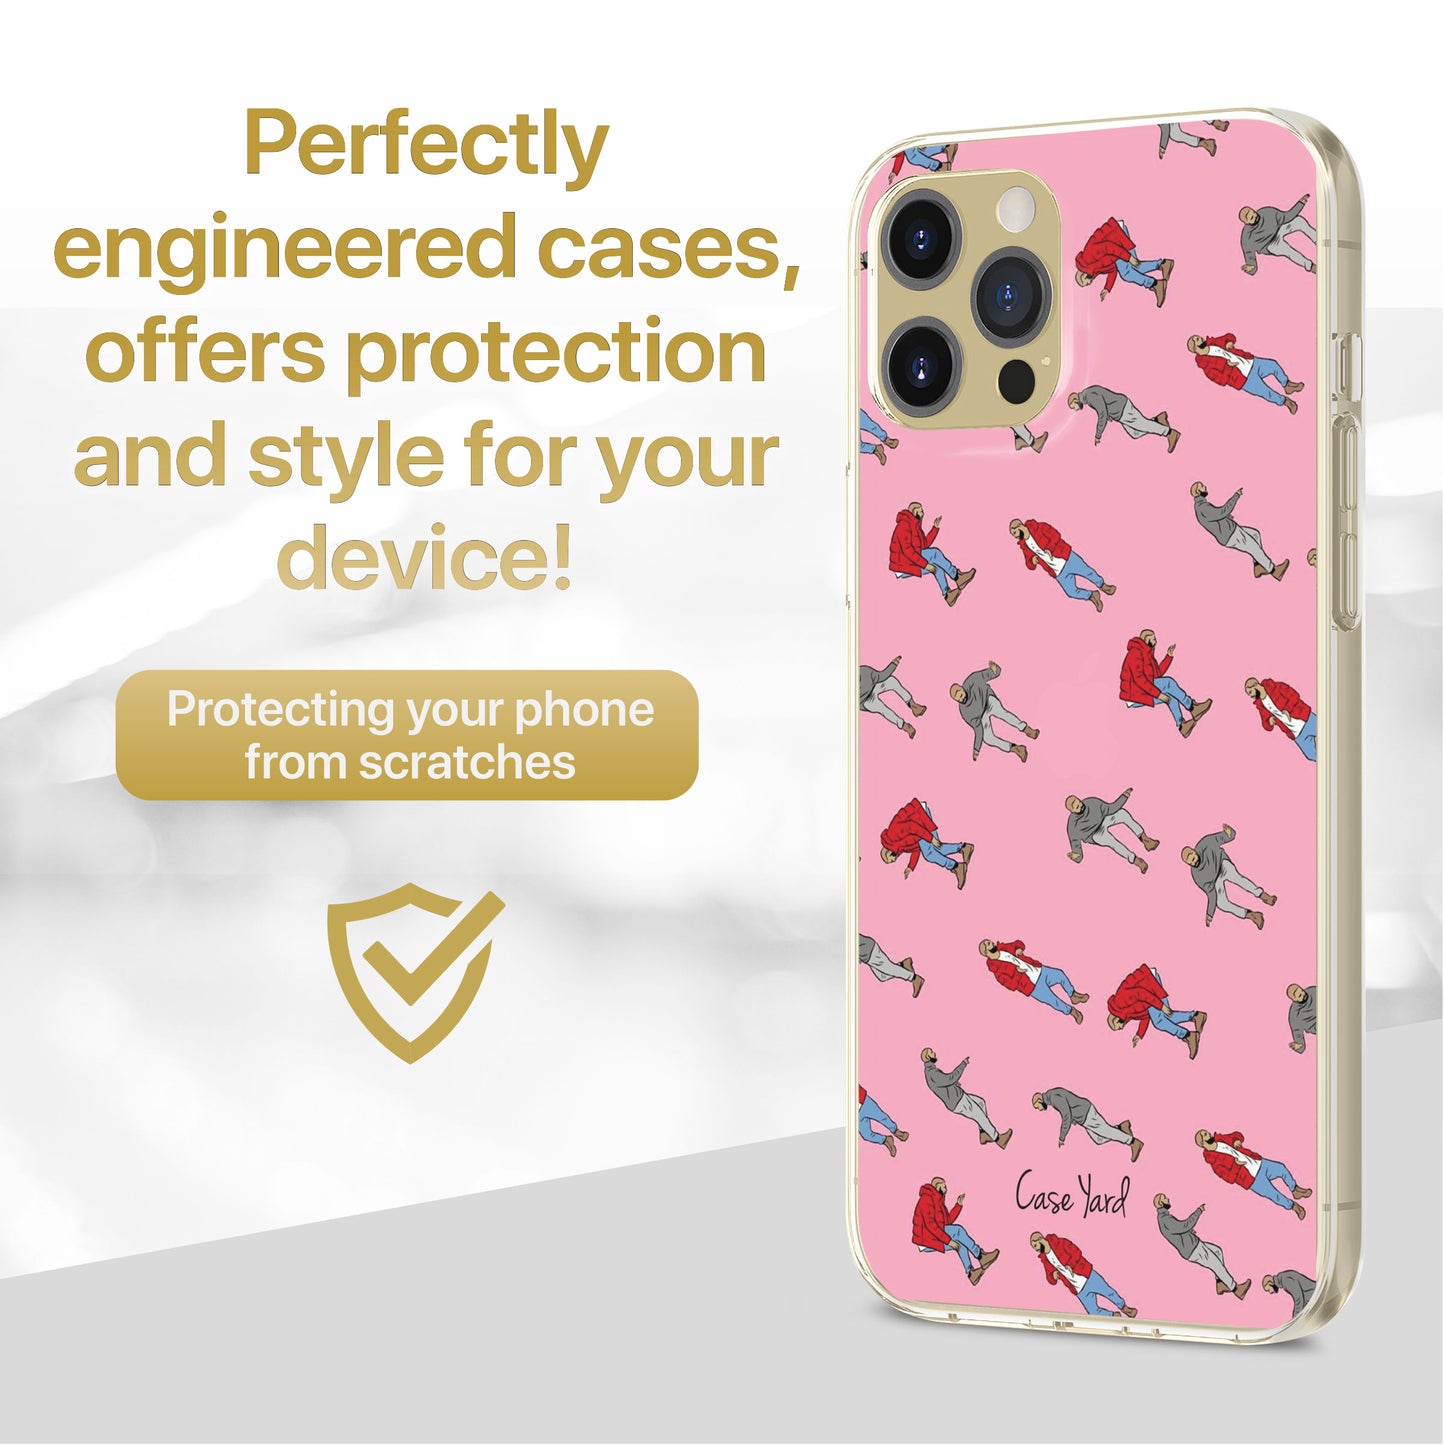 TPU Clear case with (Drake Dancing Pattern) Design for iPhone & Samsung Phones